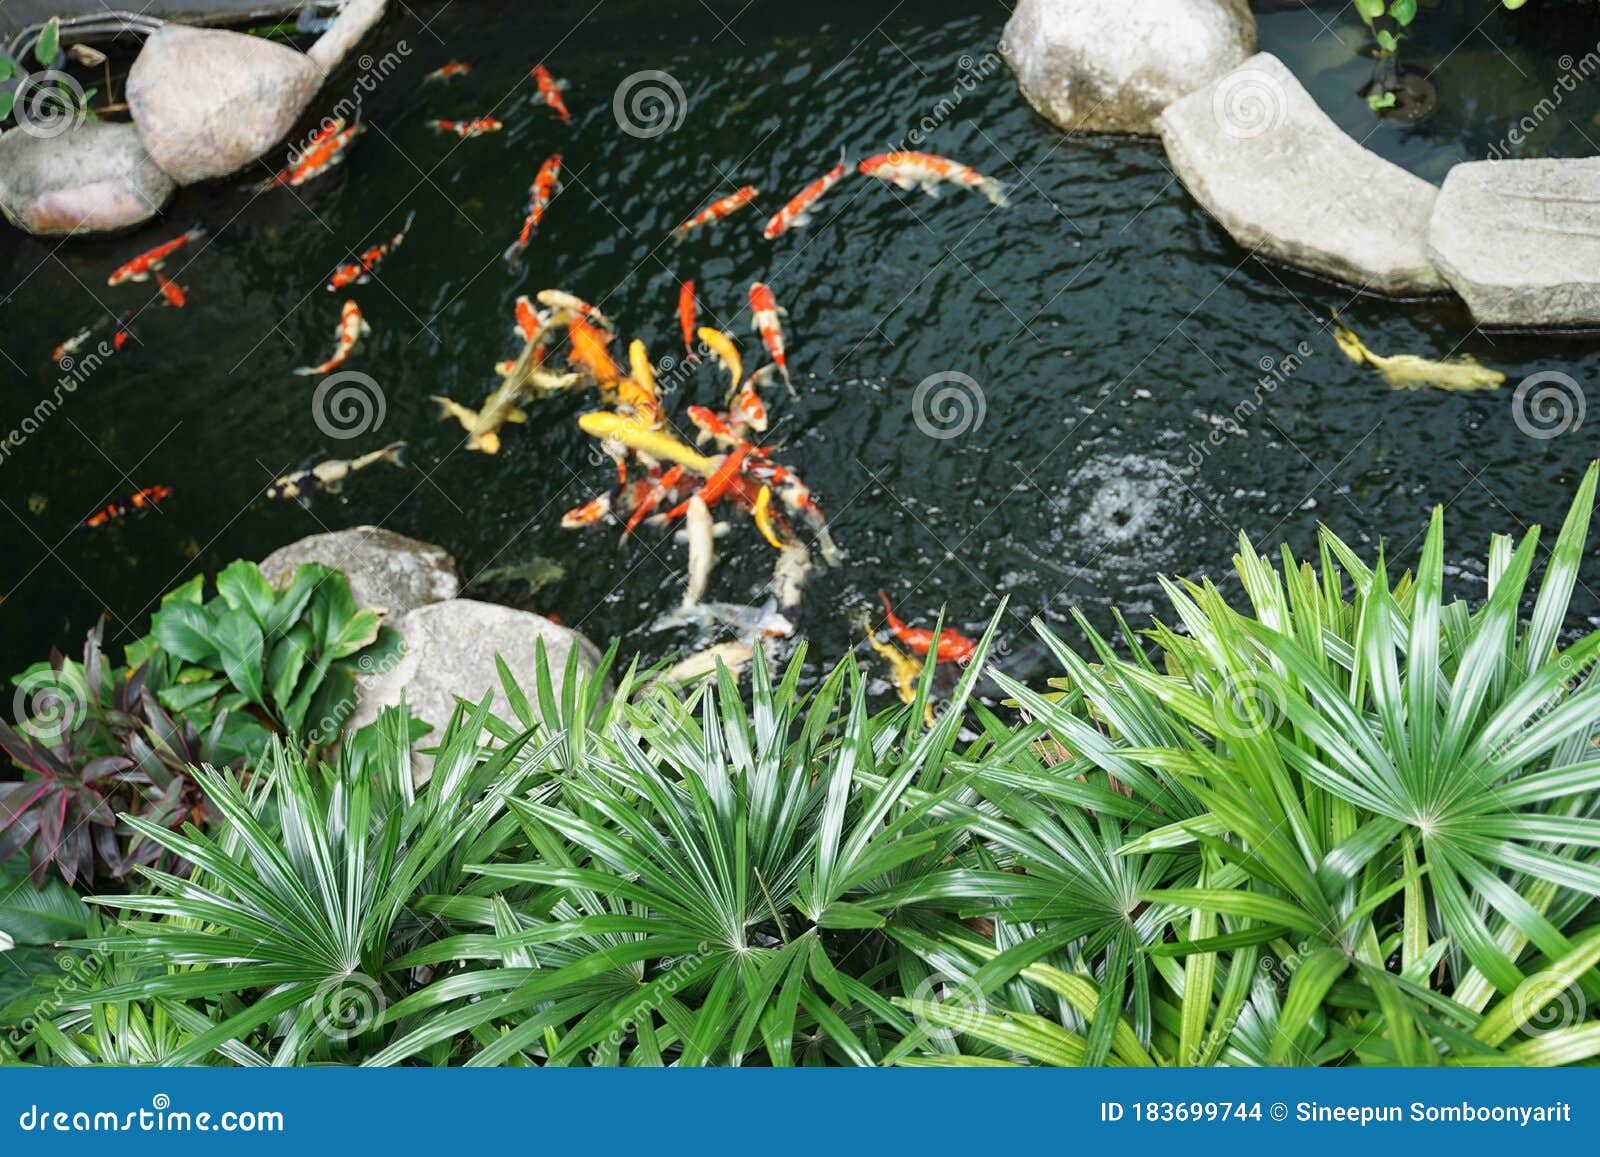 outdoor tropical fish pond